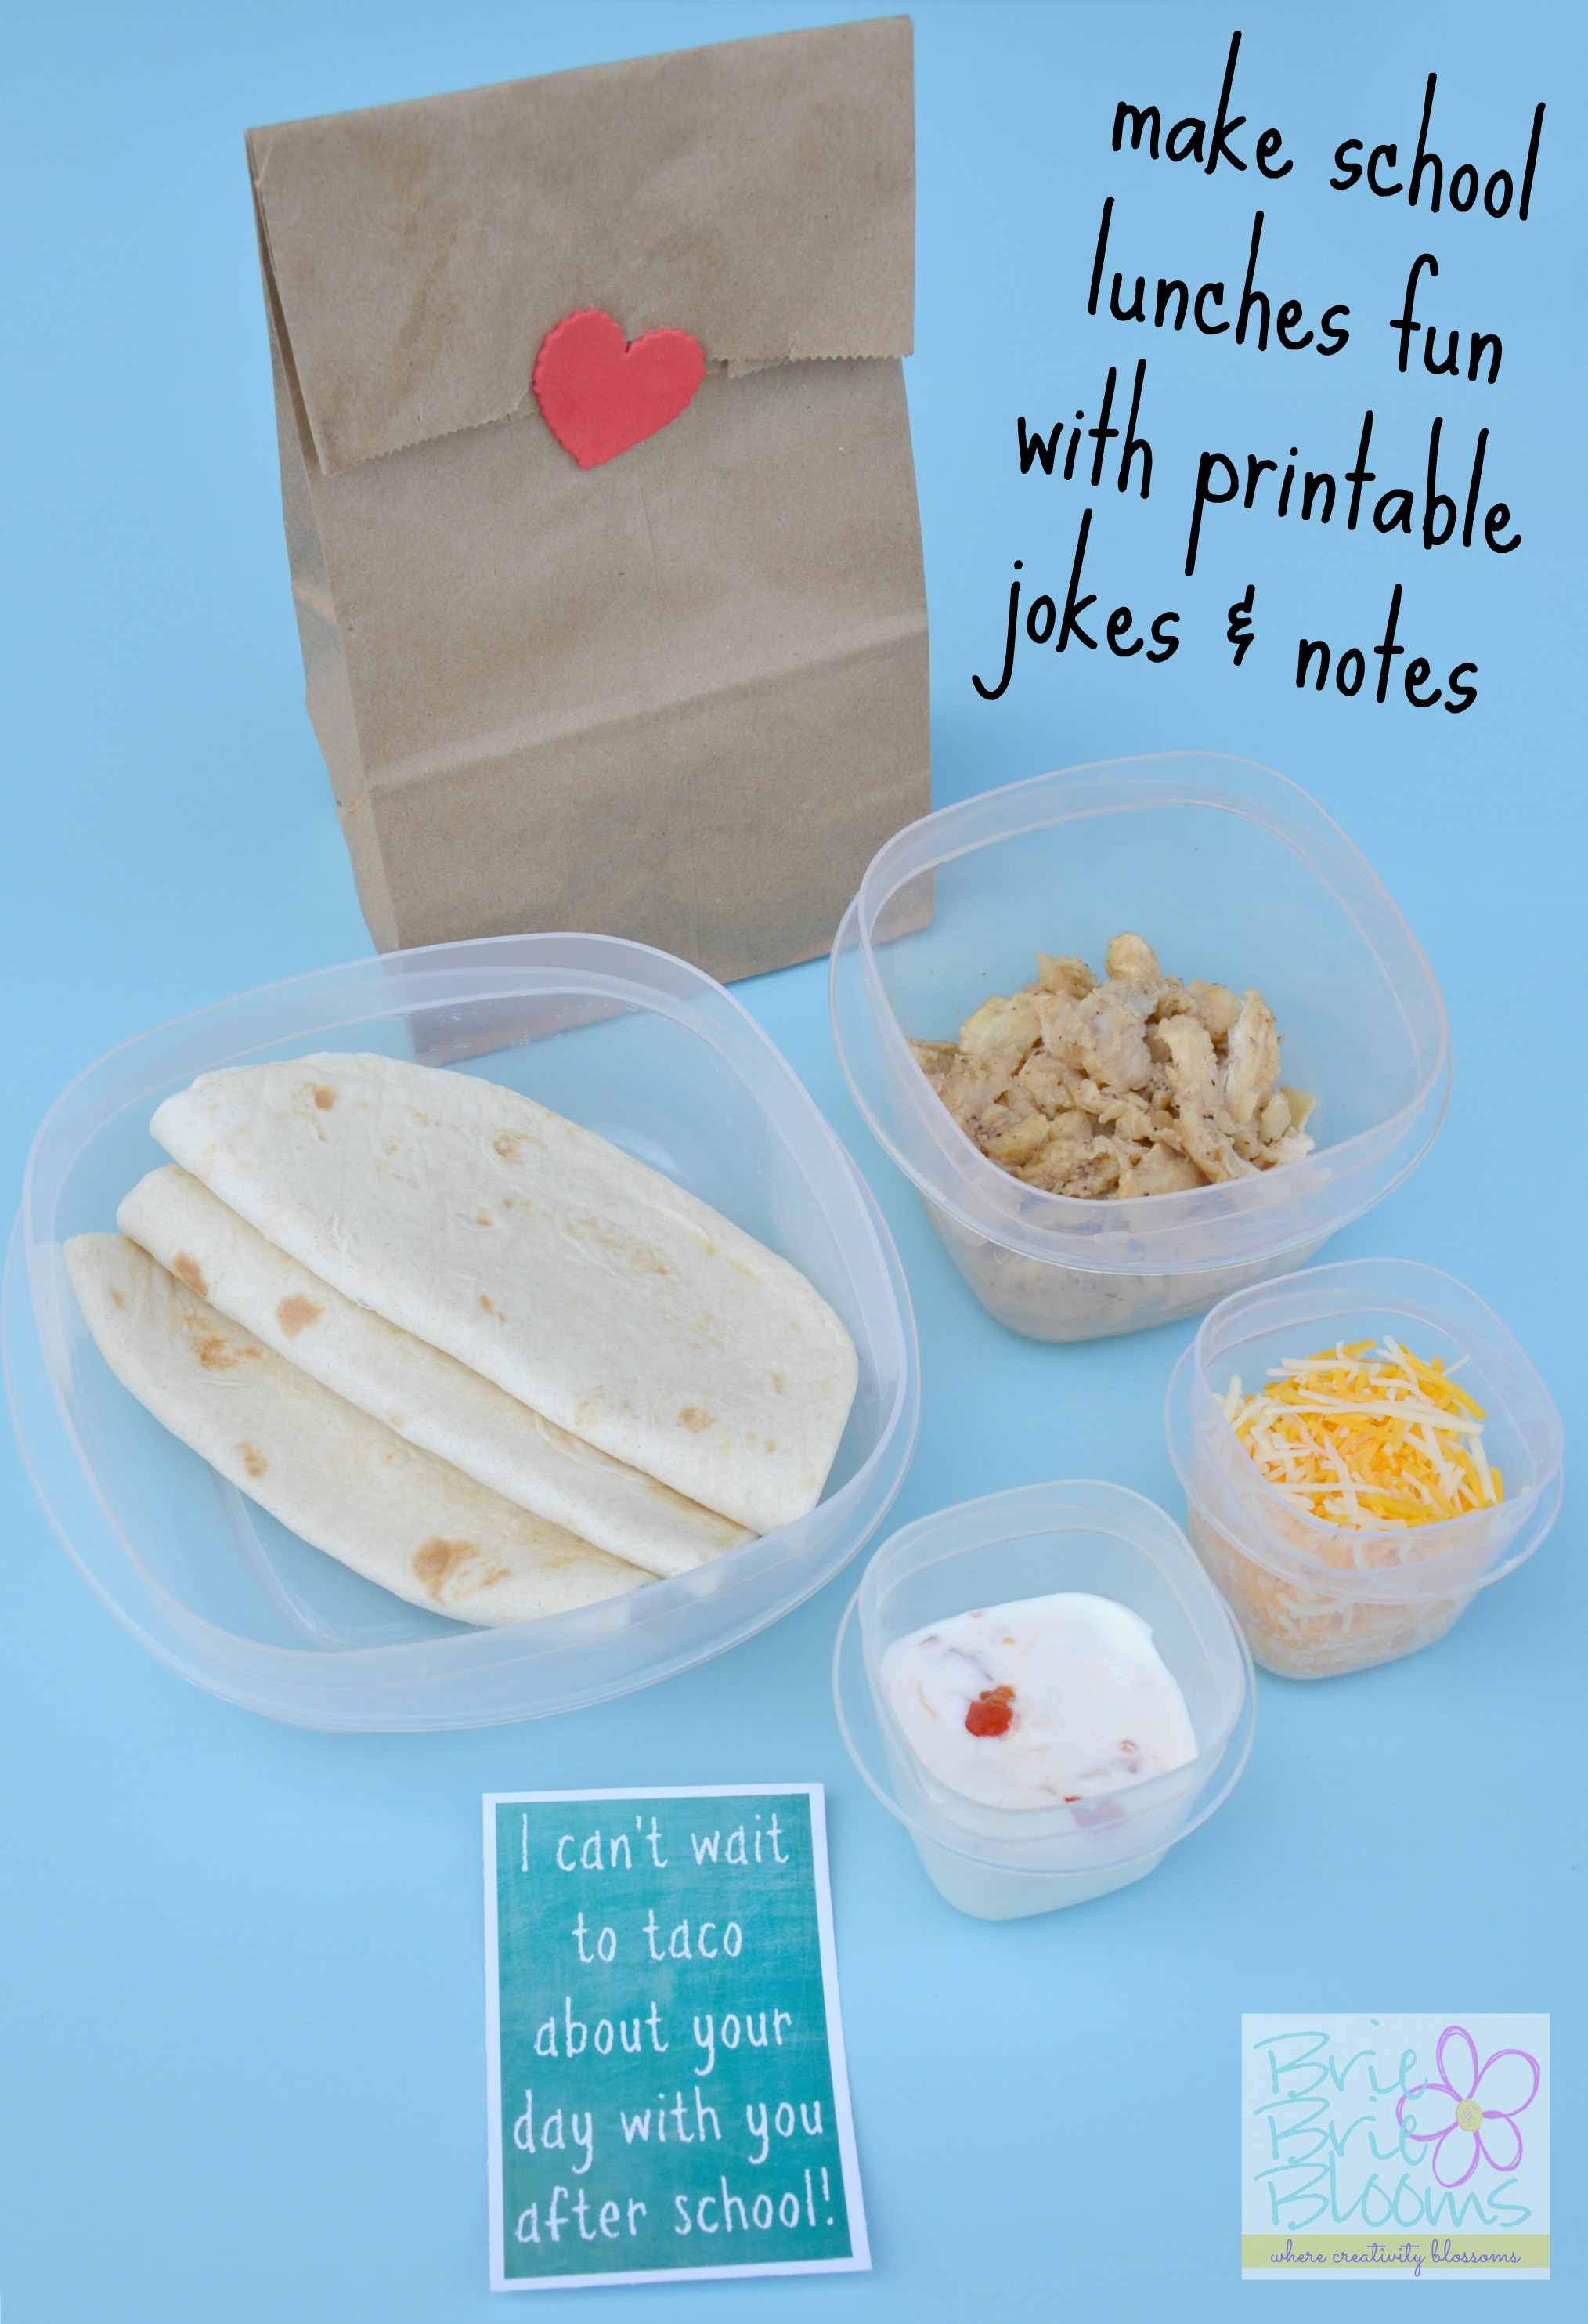 printable-notes-and-lunchbox-recipe-ideas